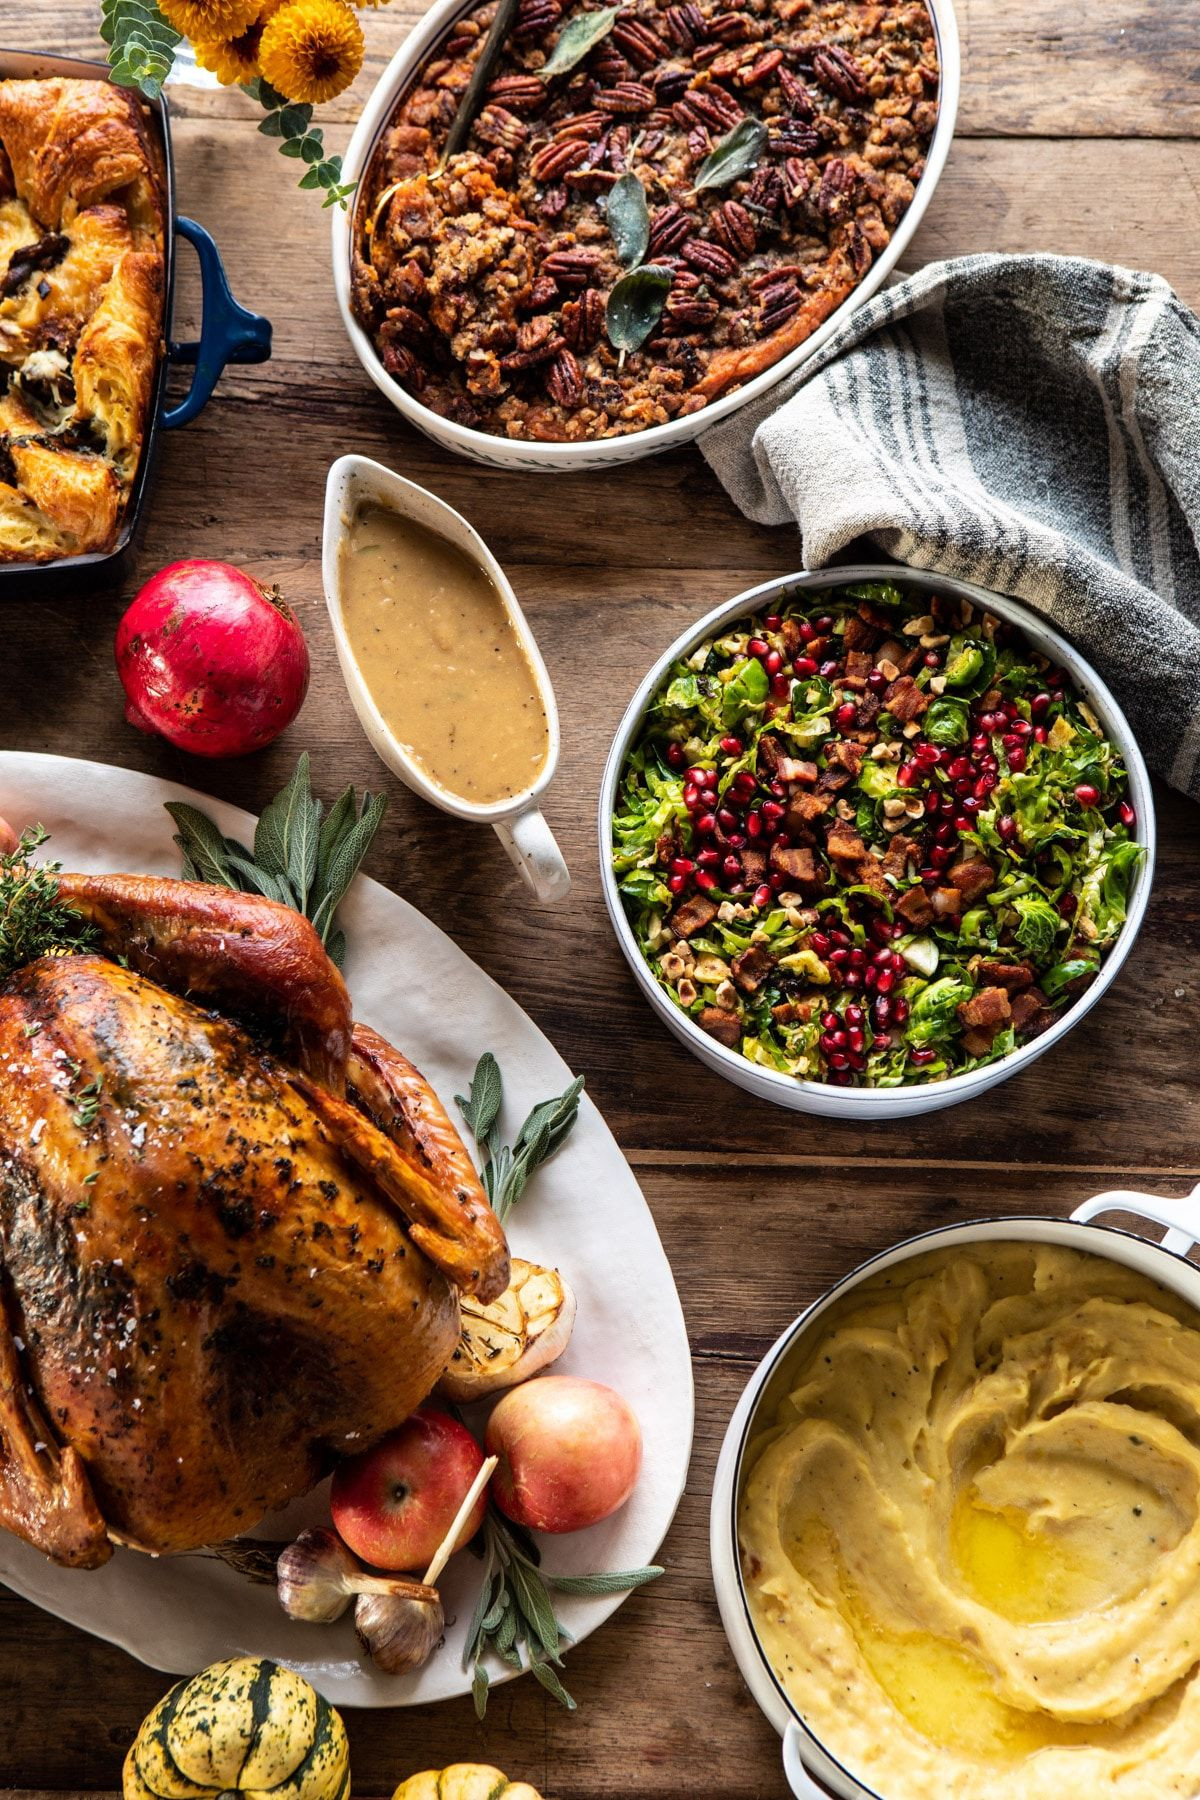 Thanksgiving 2019 Appetizers
 Our 2019 Thanksgiving Menu and Guide